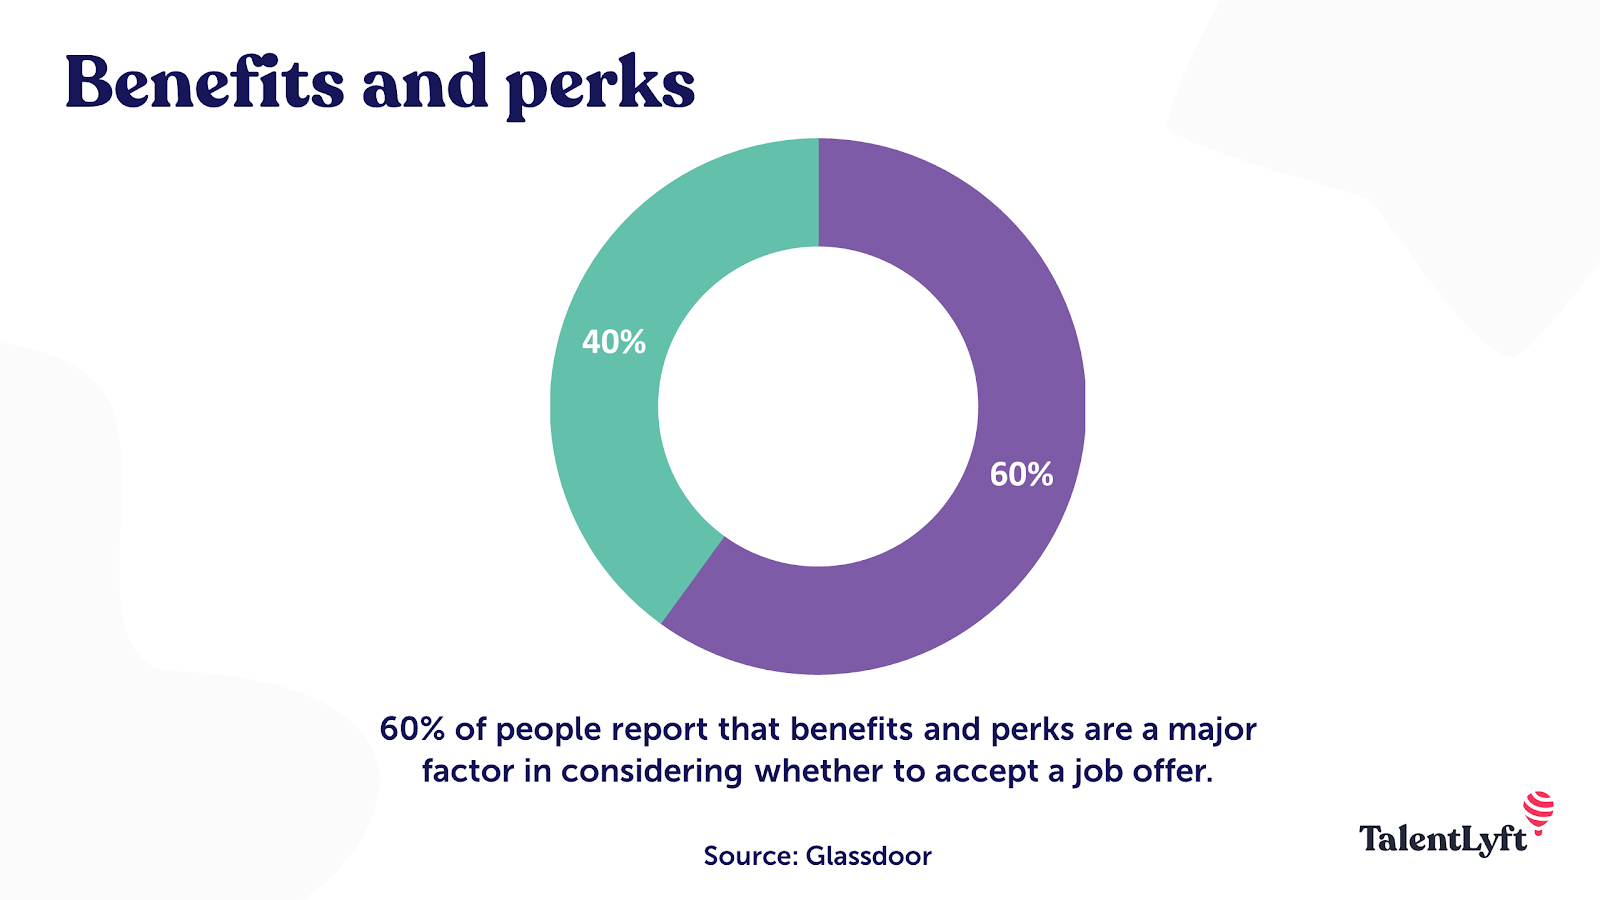 Benefits and perks importance 